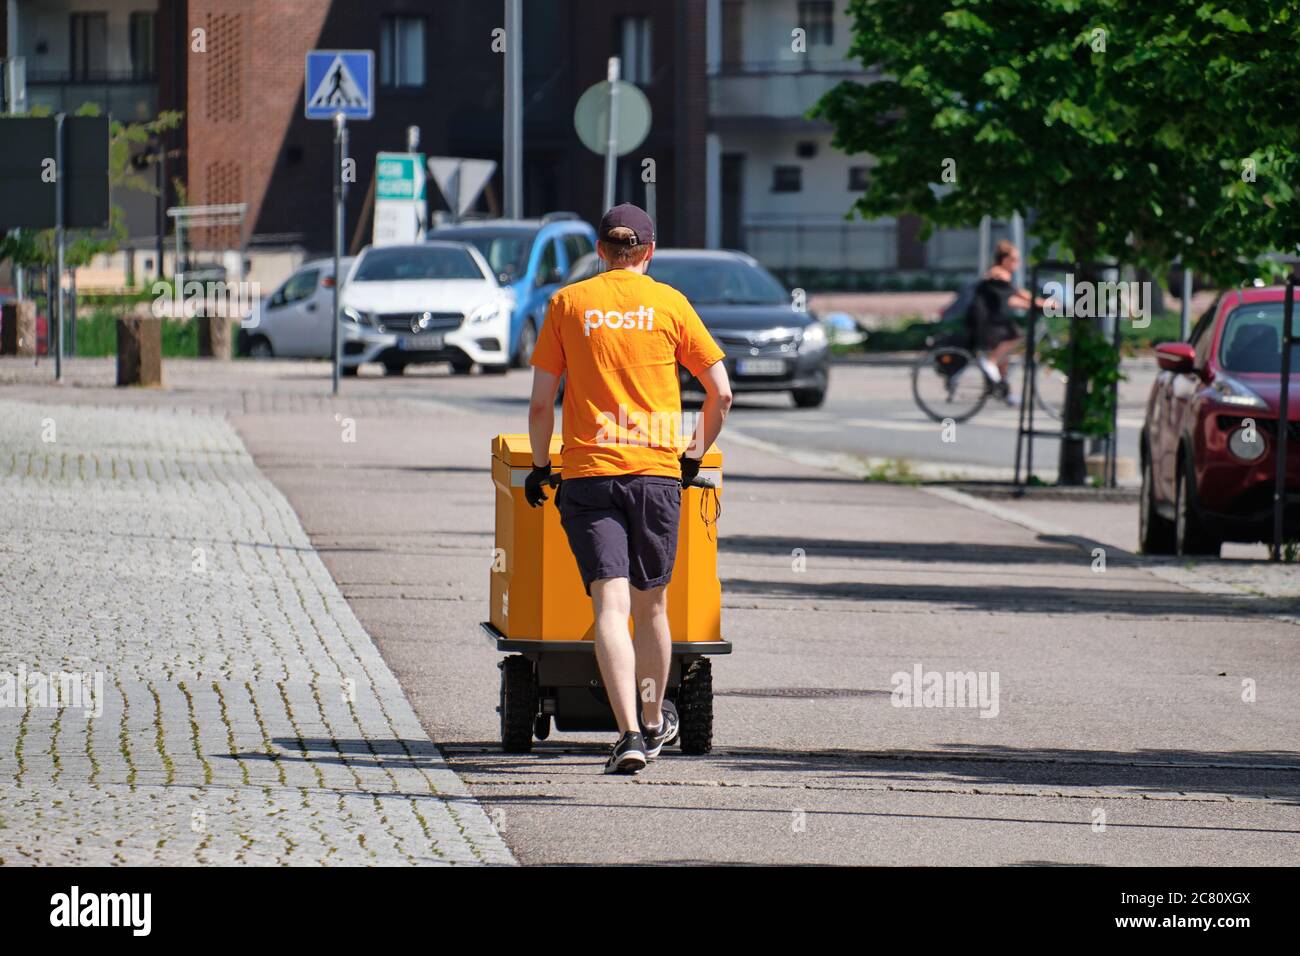 The Finnish postman walks the street with the trolley. Stock Photo